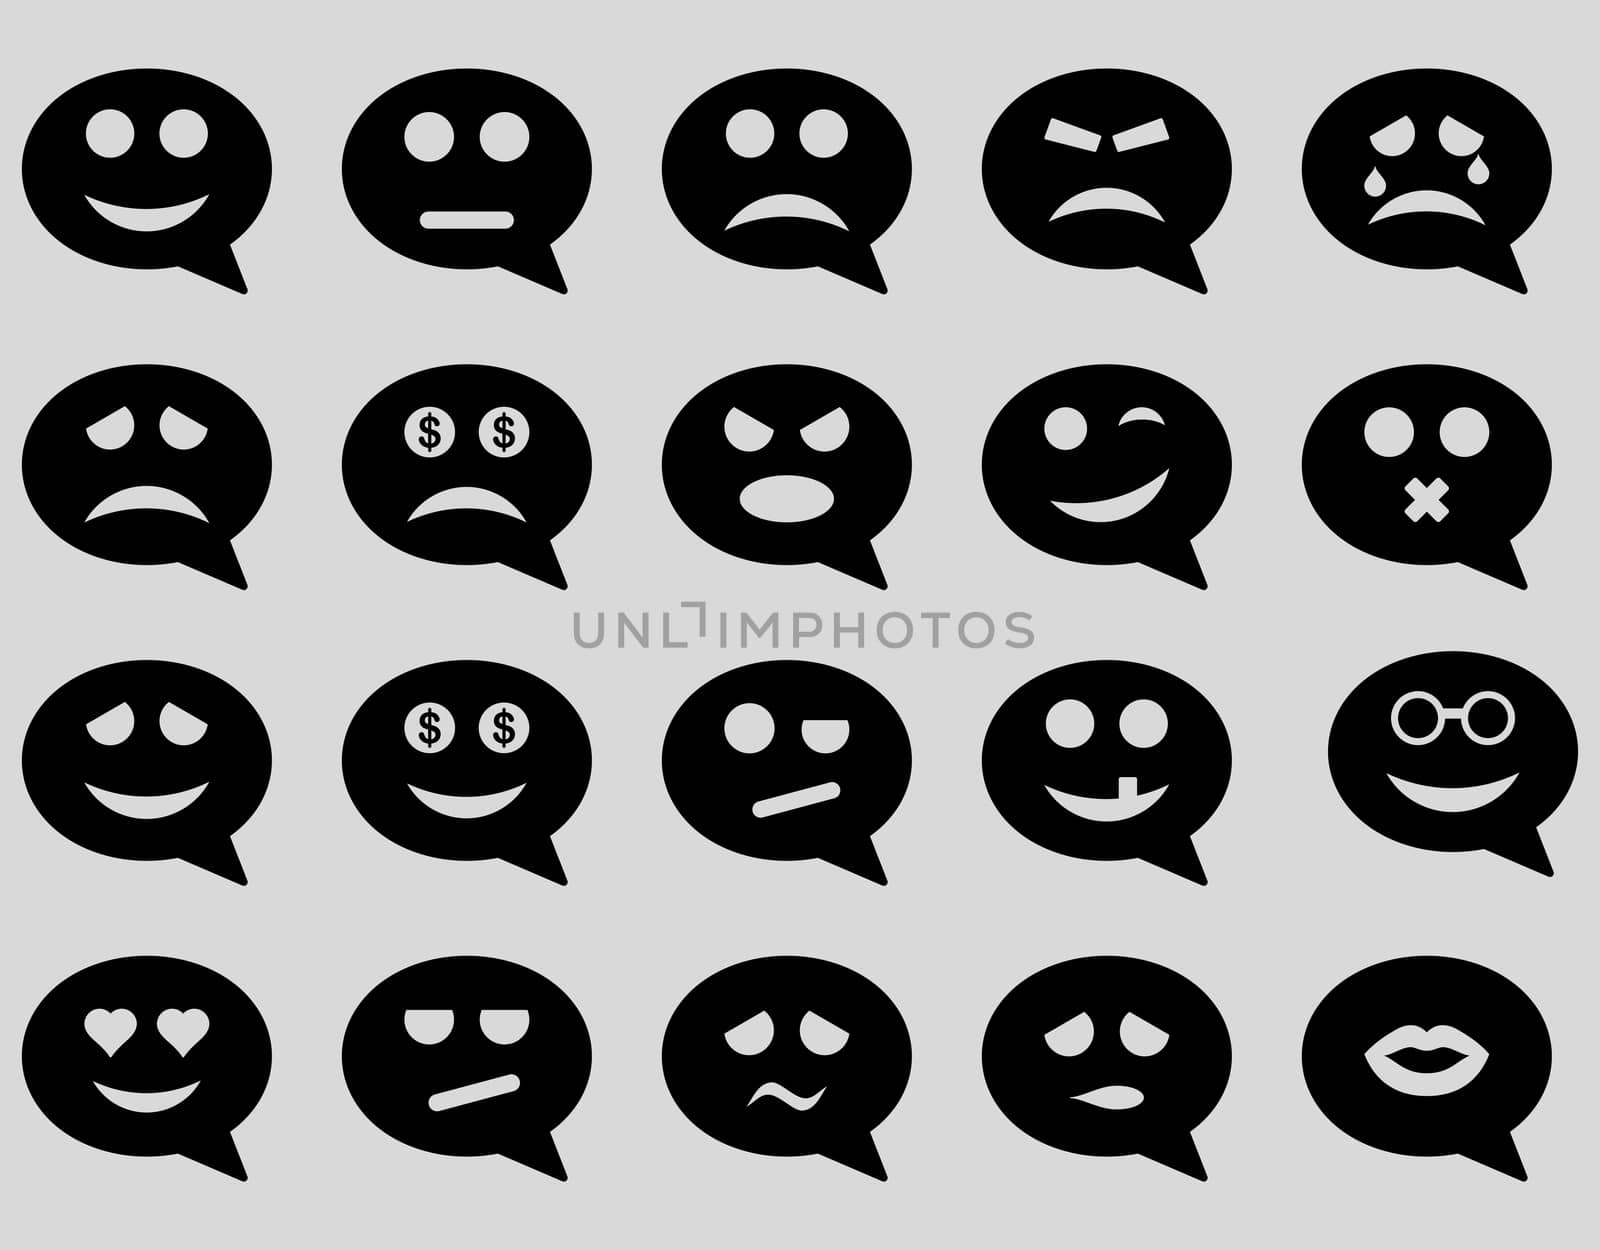 Chat emotion smile icons. Glyph set style is flat images, black symbols, isolated on a light gray background.